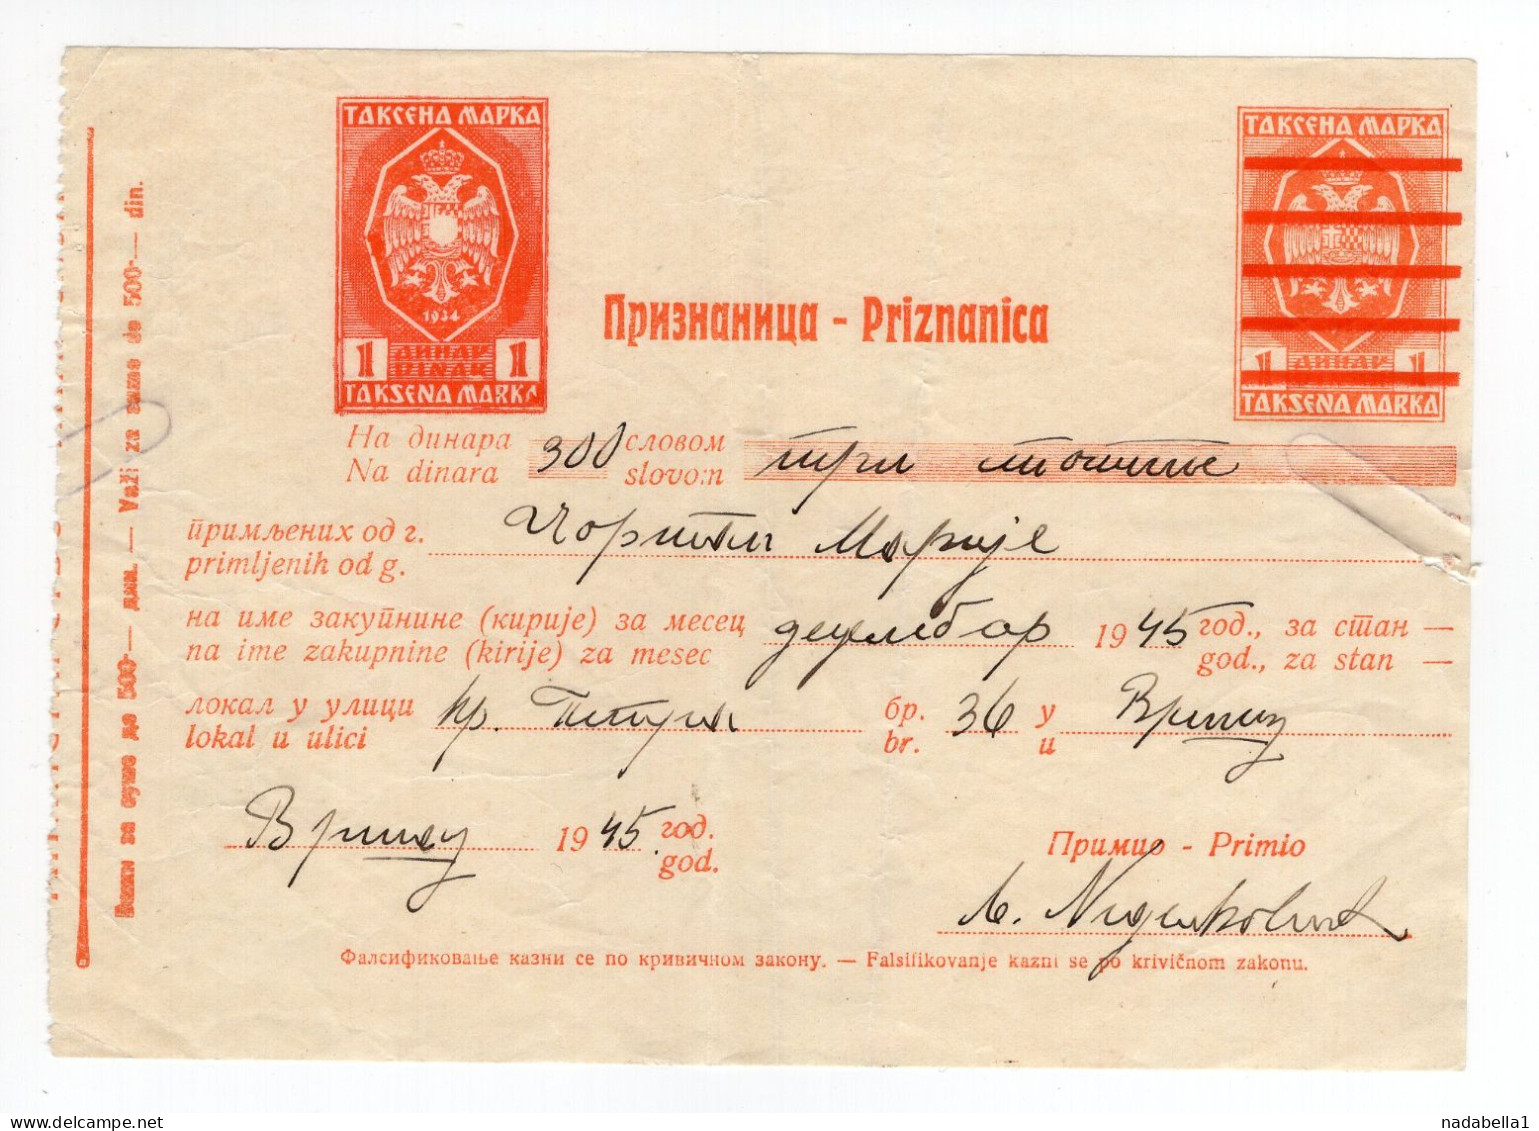 1945.YUGOSLAVIA,VRSAC,RECEIPT,SERBIA,WWII GERMAN OCCUPATION 1 DIN. OVERPRINTED REVENUE STAMP FORM USED AFTER THE WAR - Covers & Documents